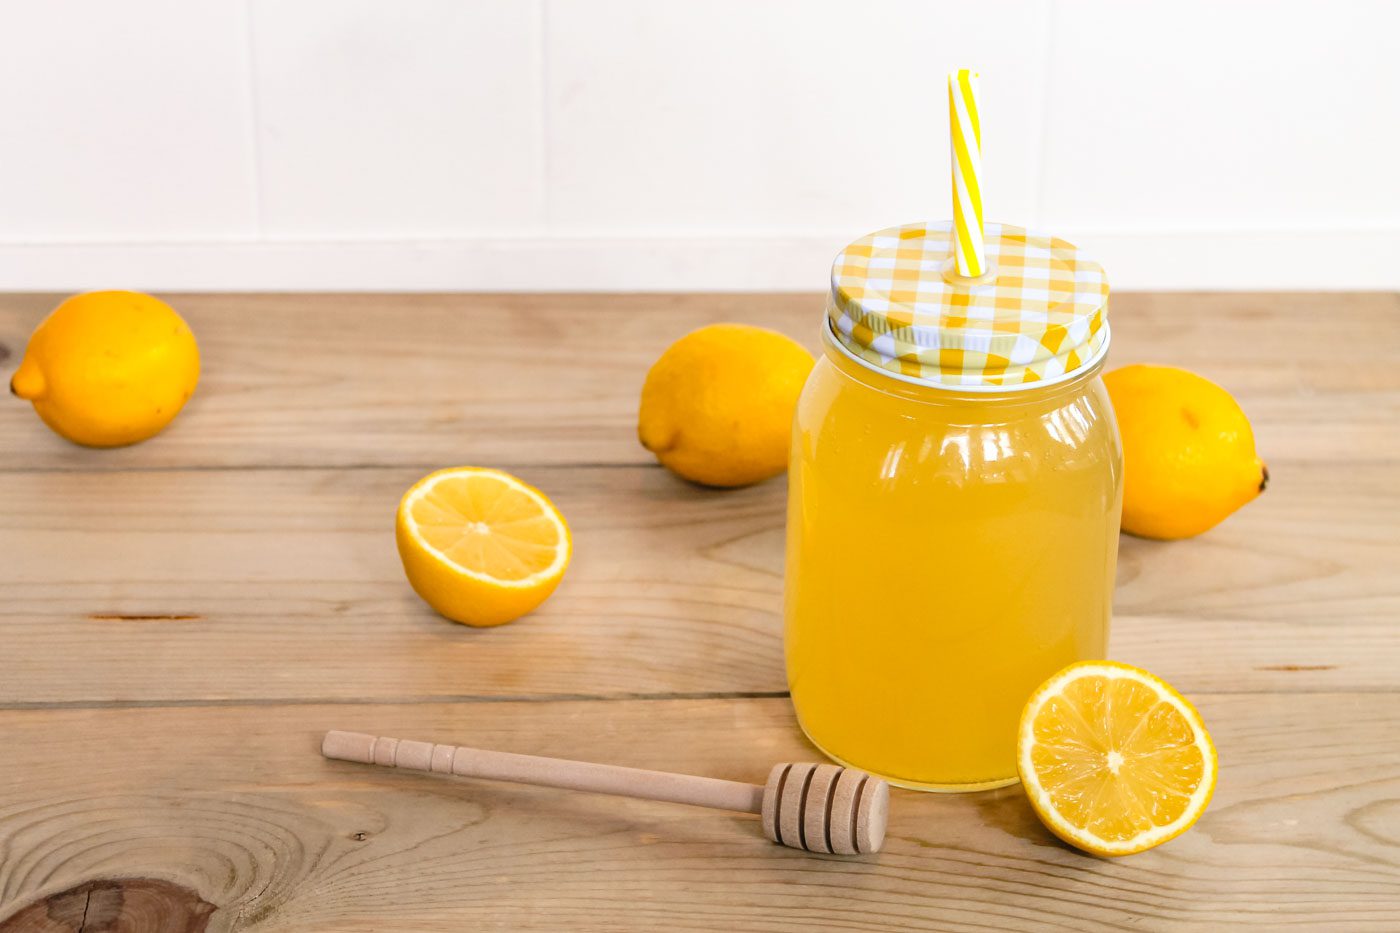 mason jar with yellow plaid lid and striped yellow straw. inside the jar is lemonade.